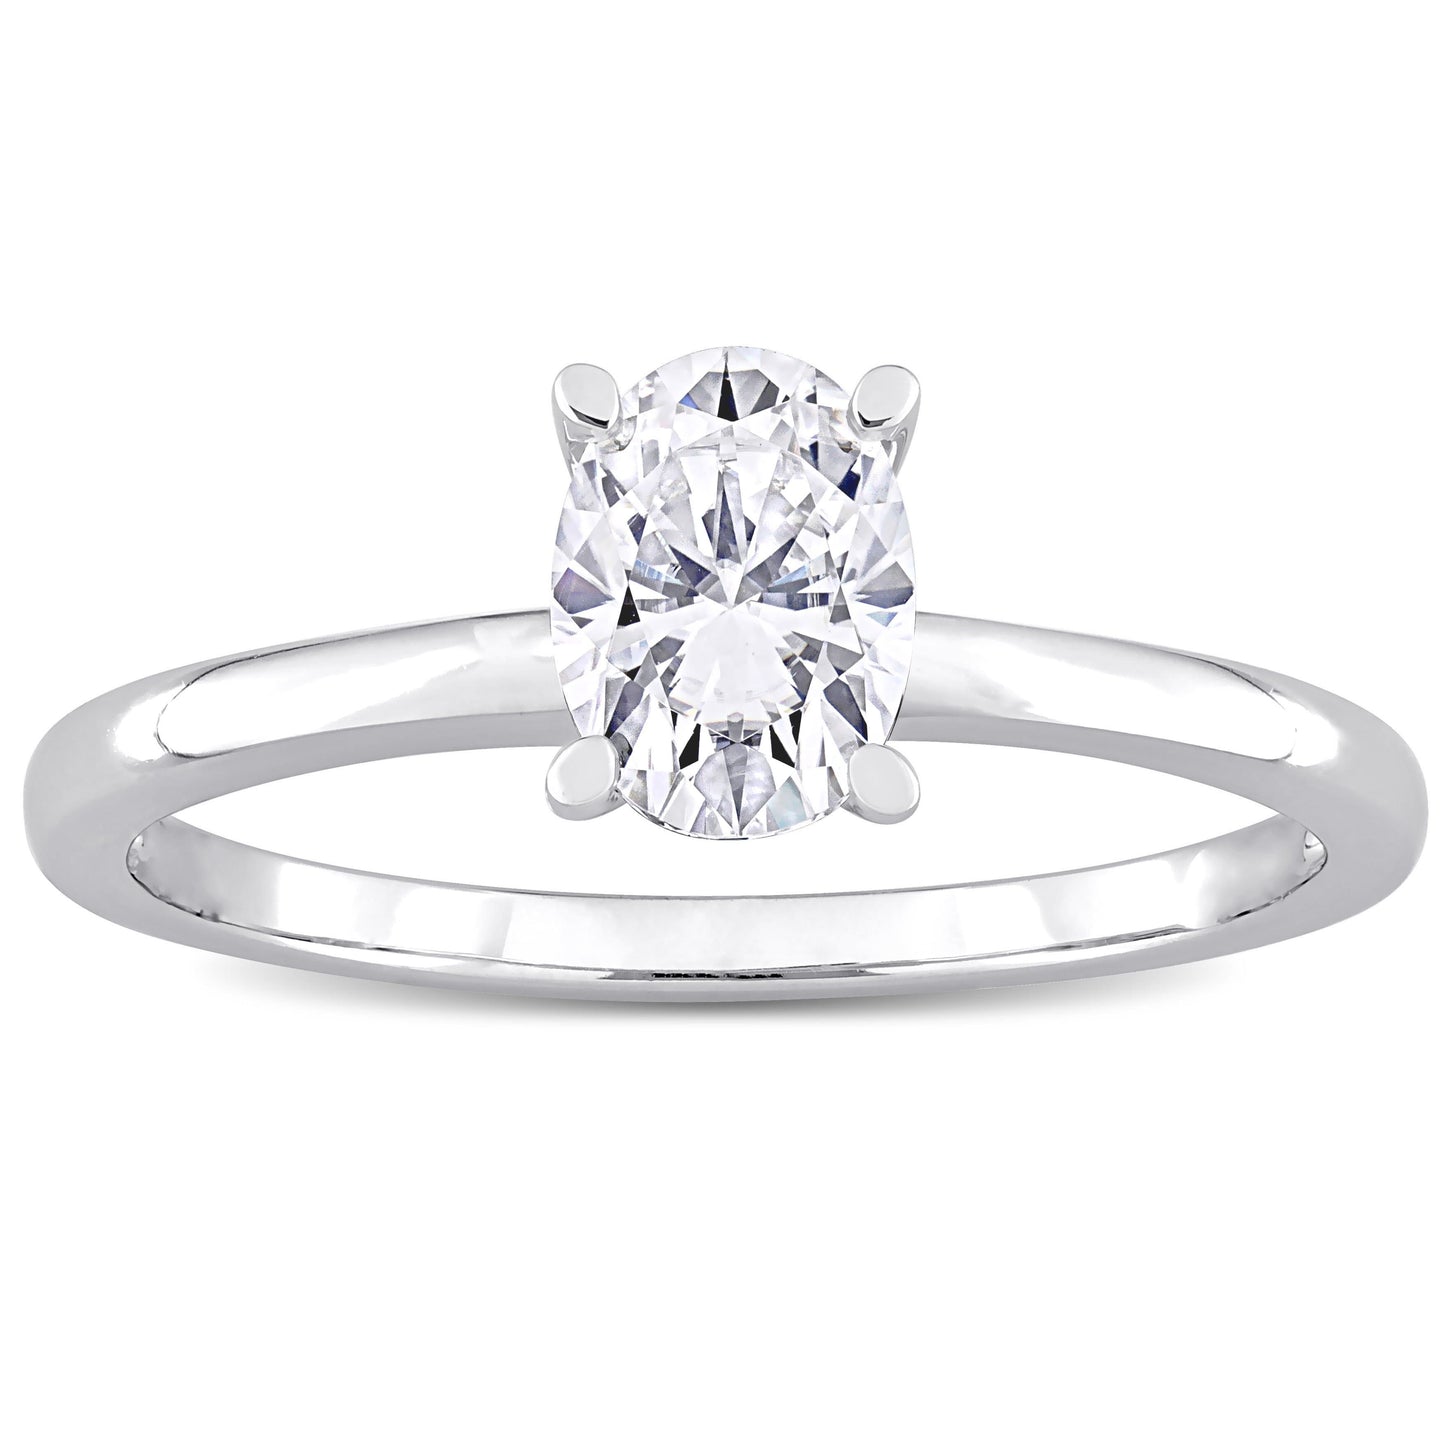 1ct Solitaire Moissanite Ring in Sterling Silver